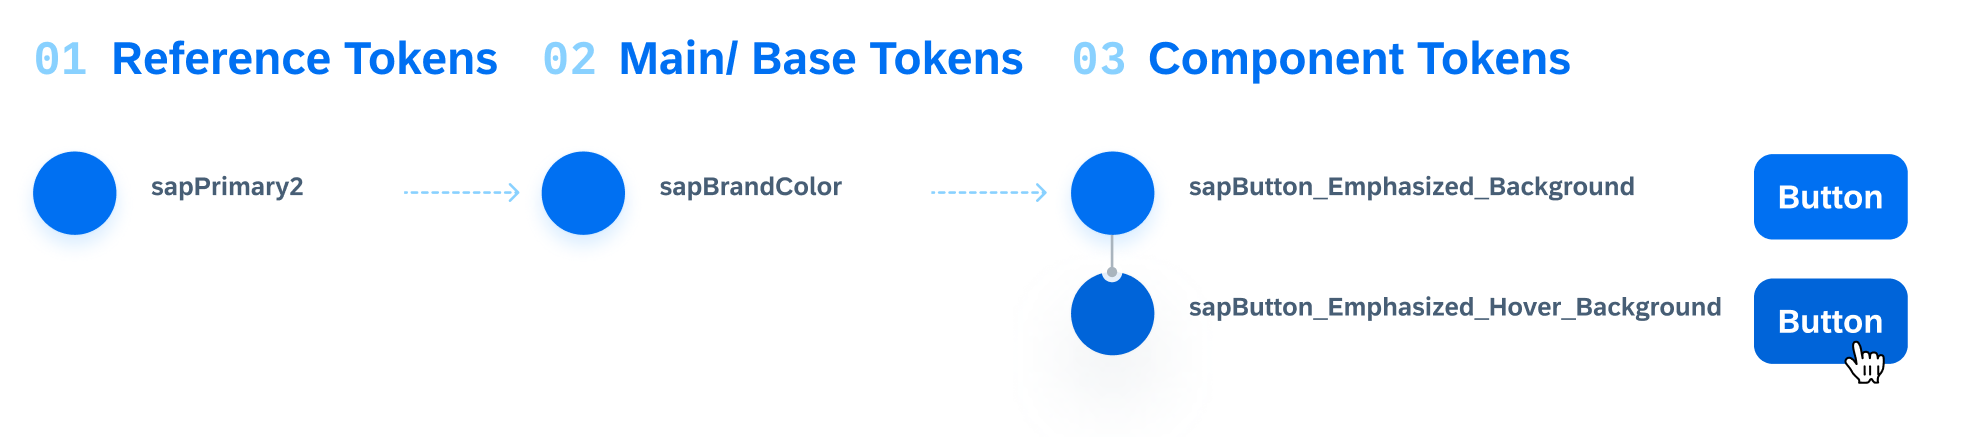 Relationship between reference tokens, main/base tokens, and component tokens